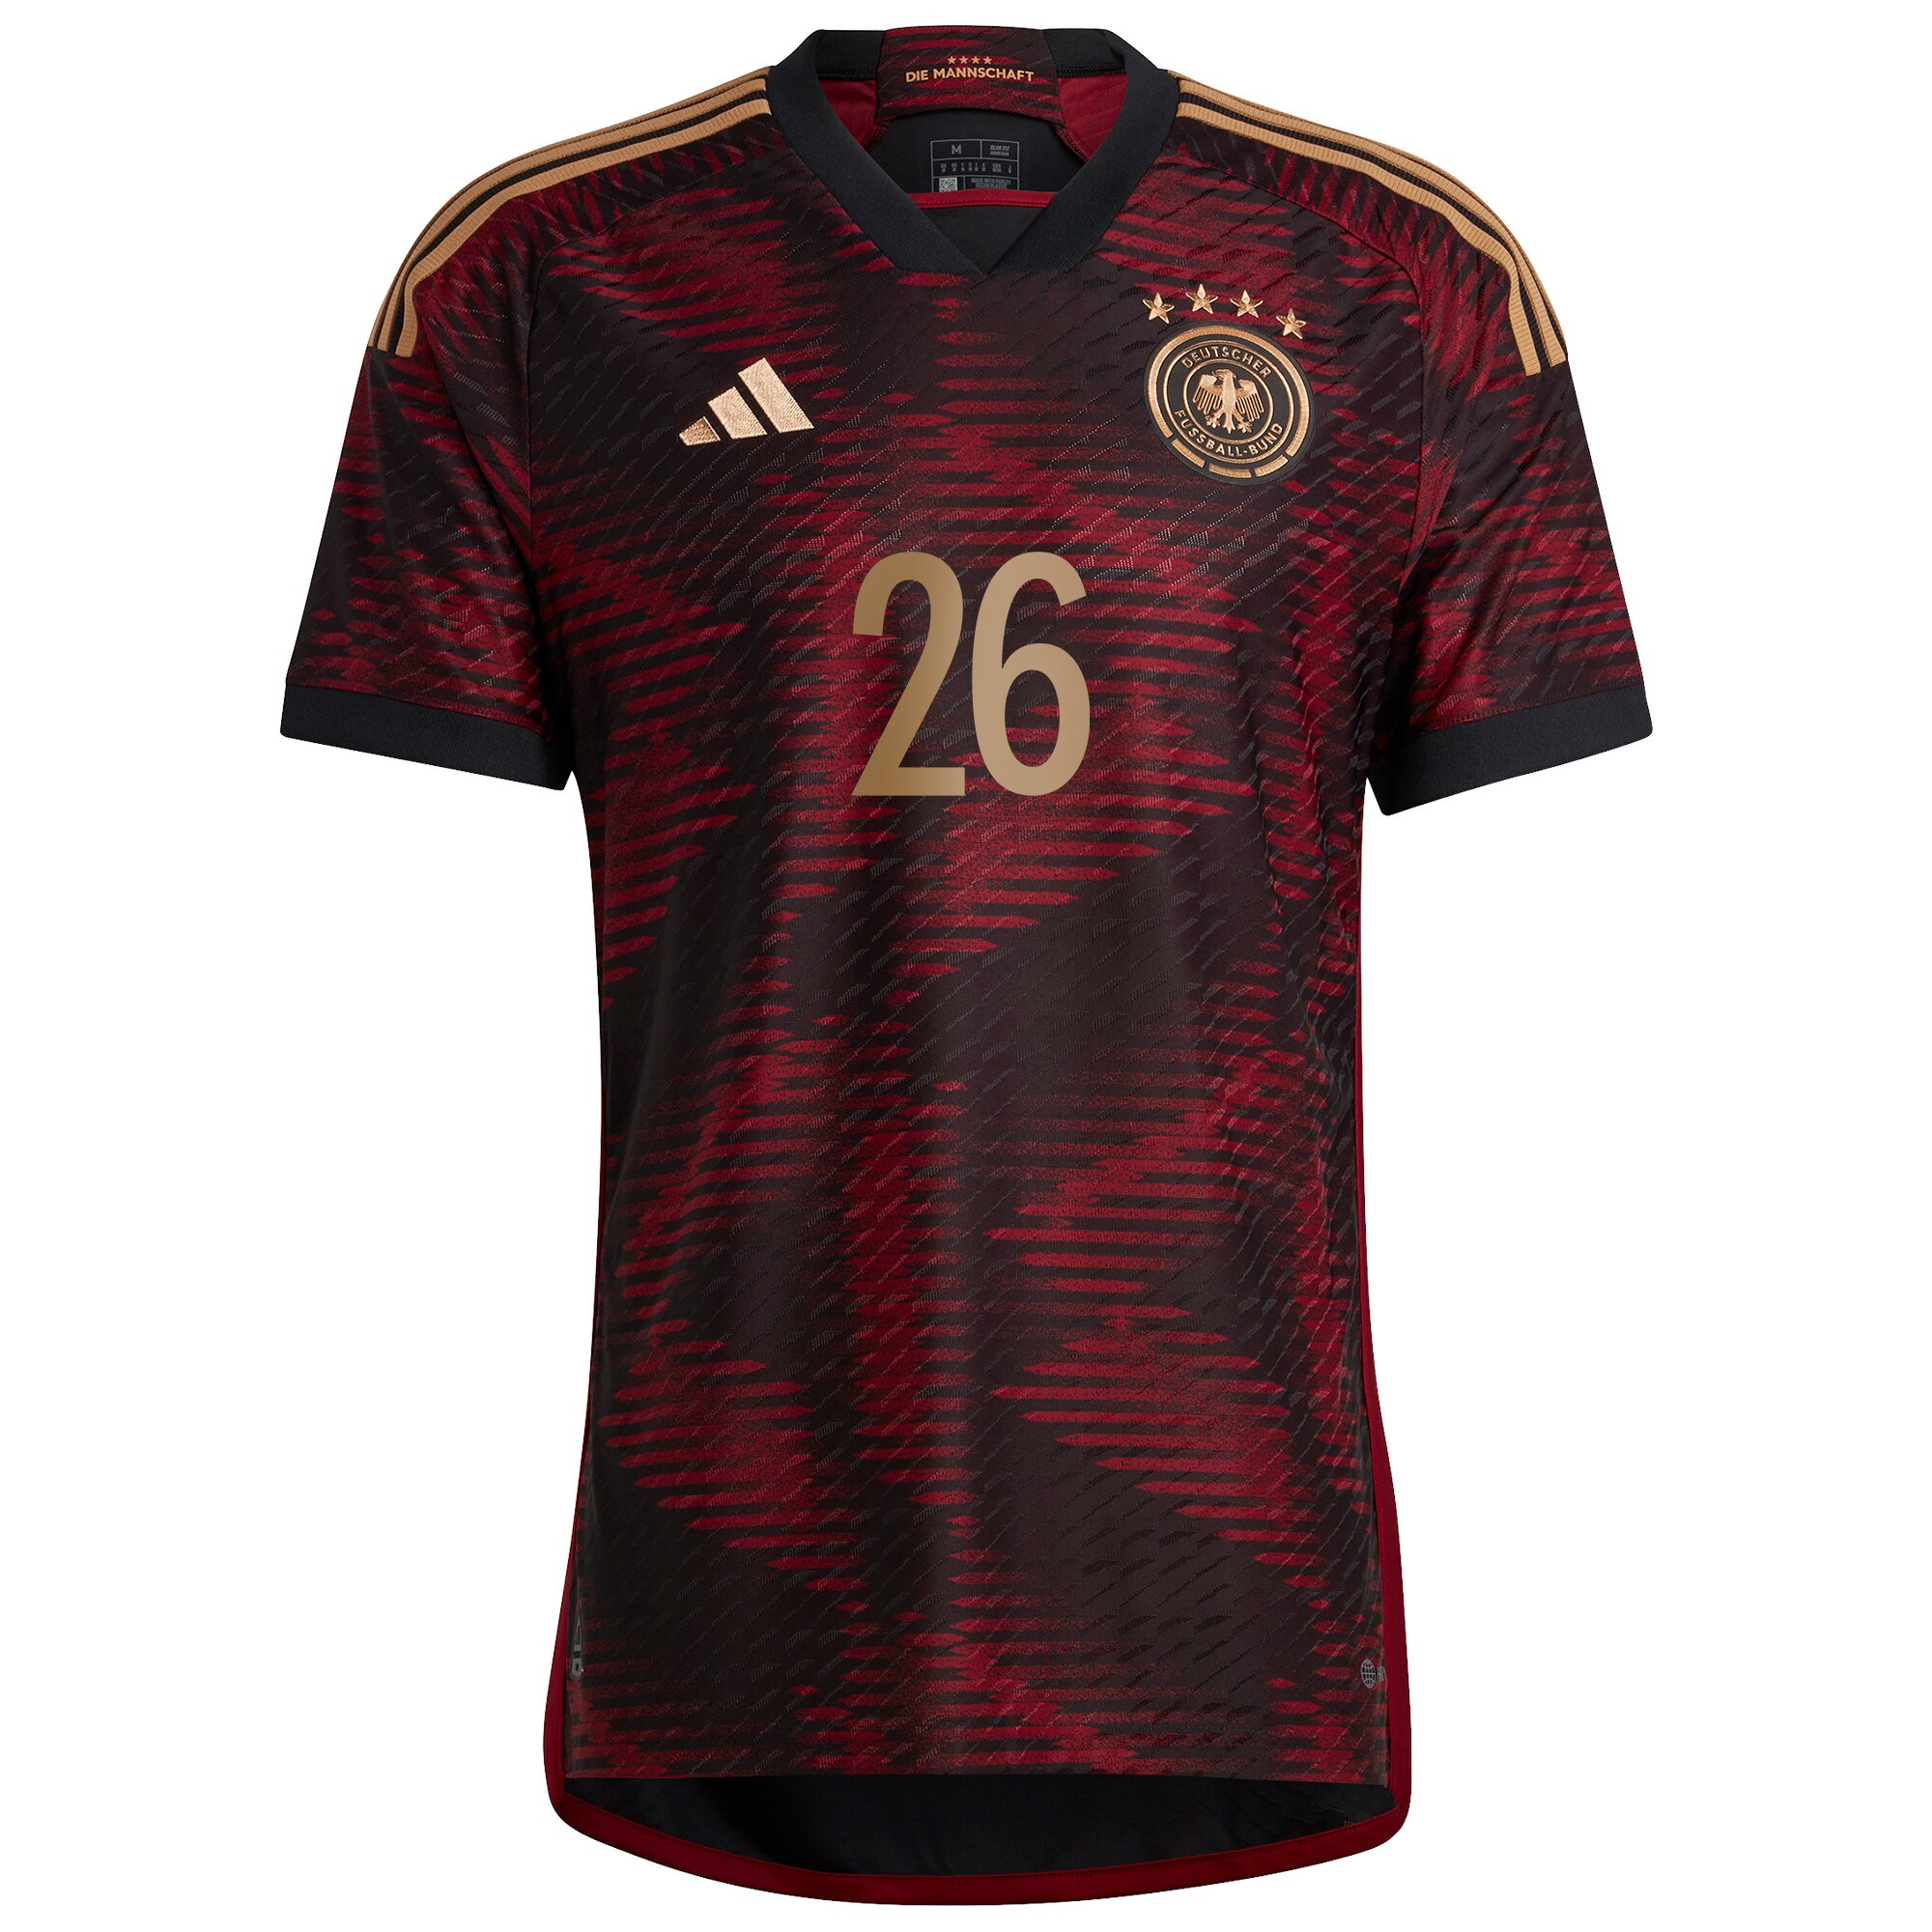 Germany Away Authentic Shirt with Günter 26 printing